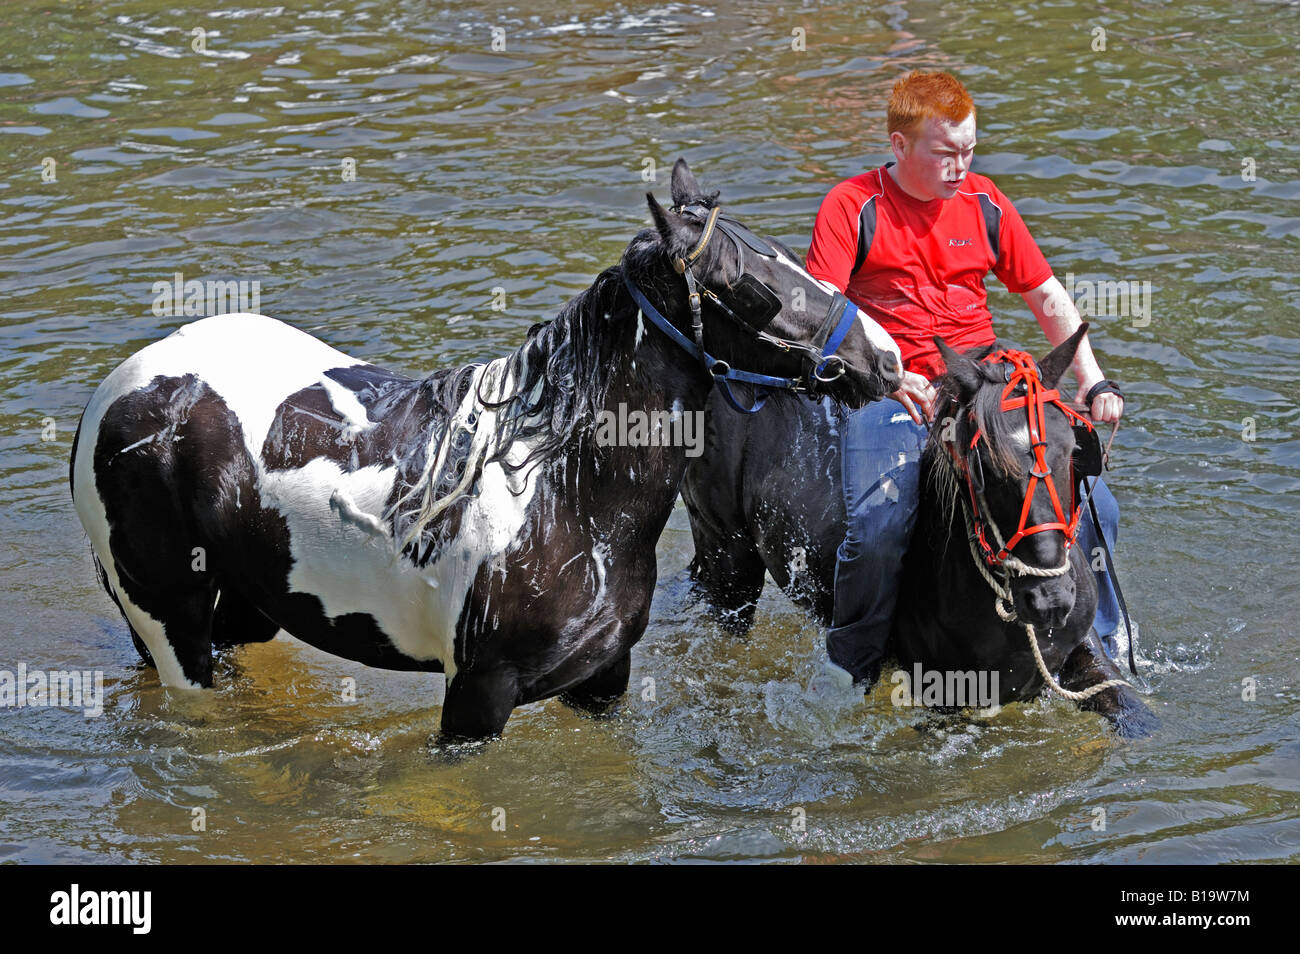 Gypsy traveller boy with horses in the River Eden. Appleby Horse Fair. Appleby-in-Westmorland, Cumbria, England. Stock Photo